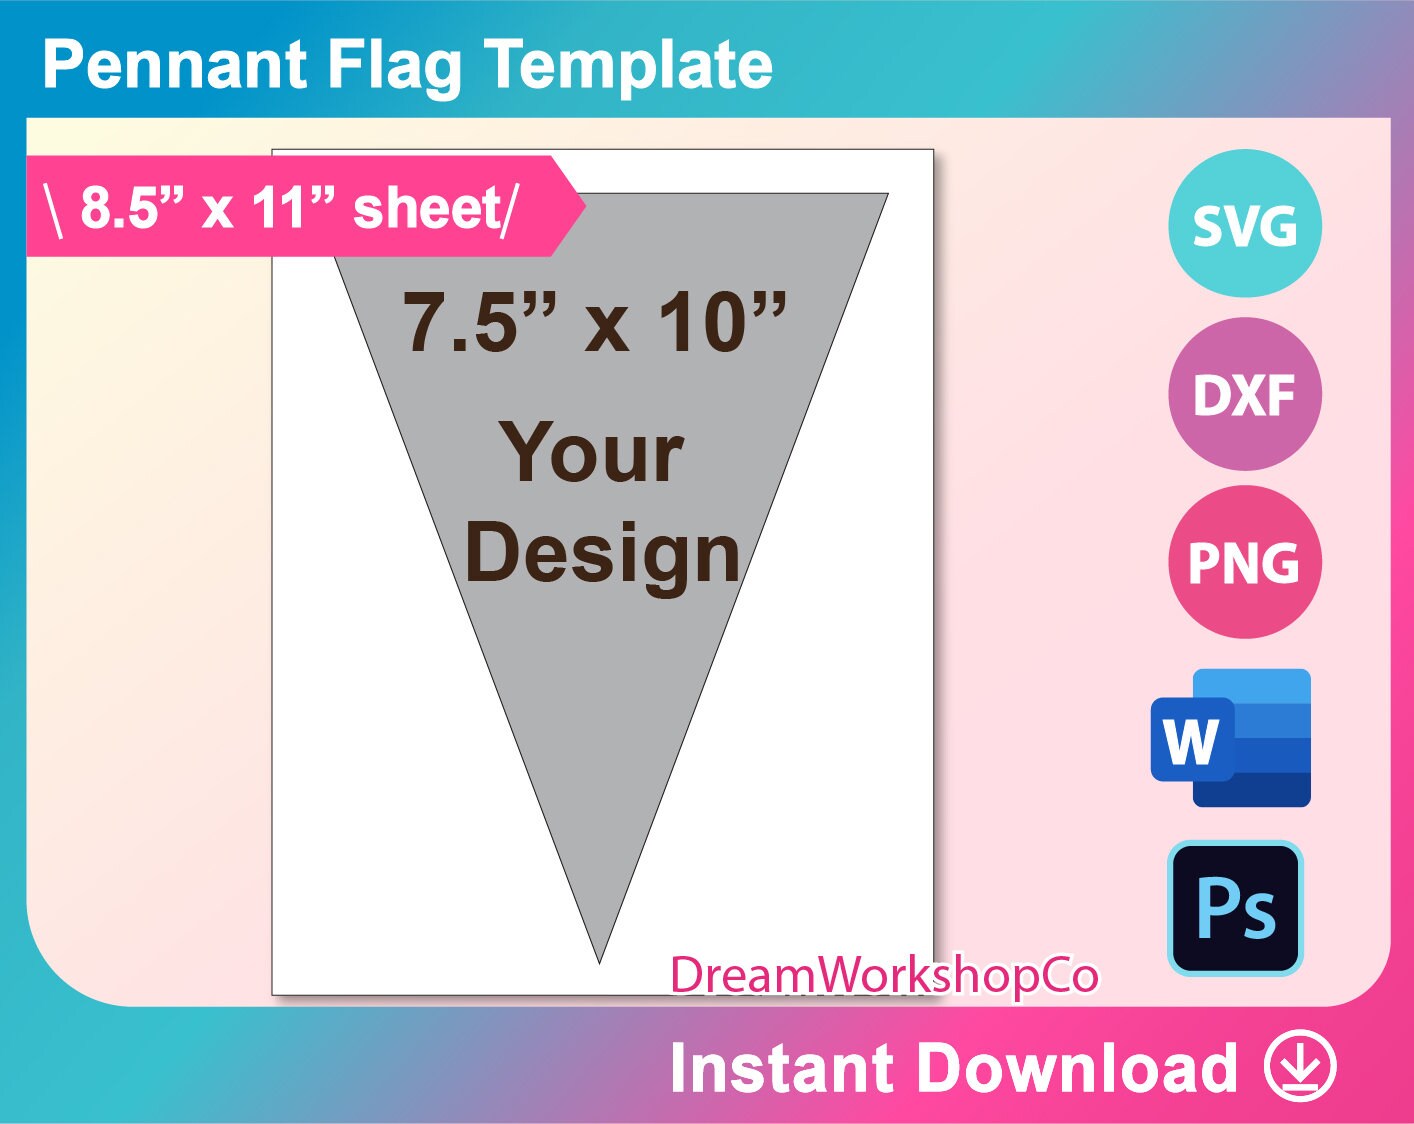 Instant Download Ms word PNG 8.5x11 sheet Dxf Banner Flag Template Bunting Banner Template SVG Printable PSD